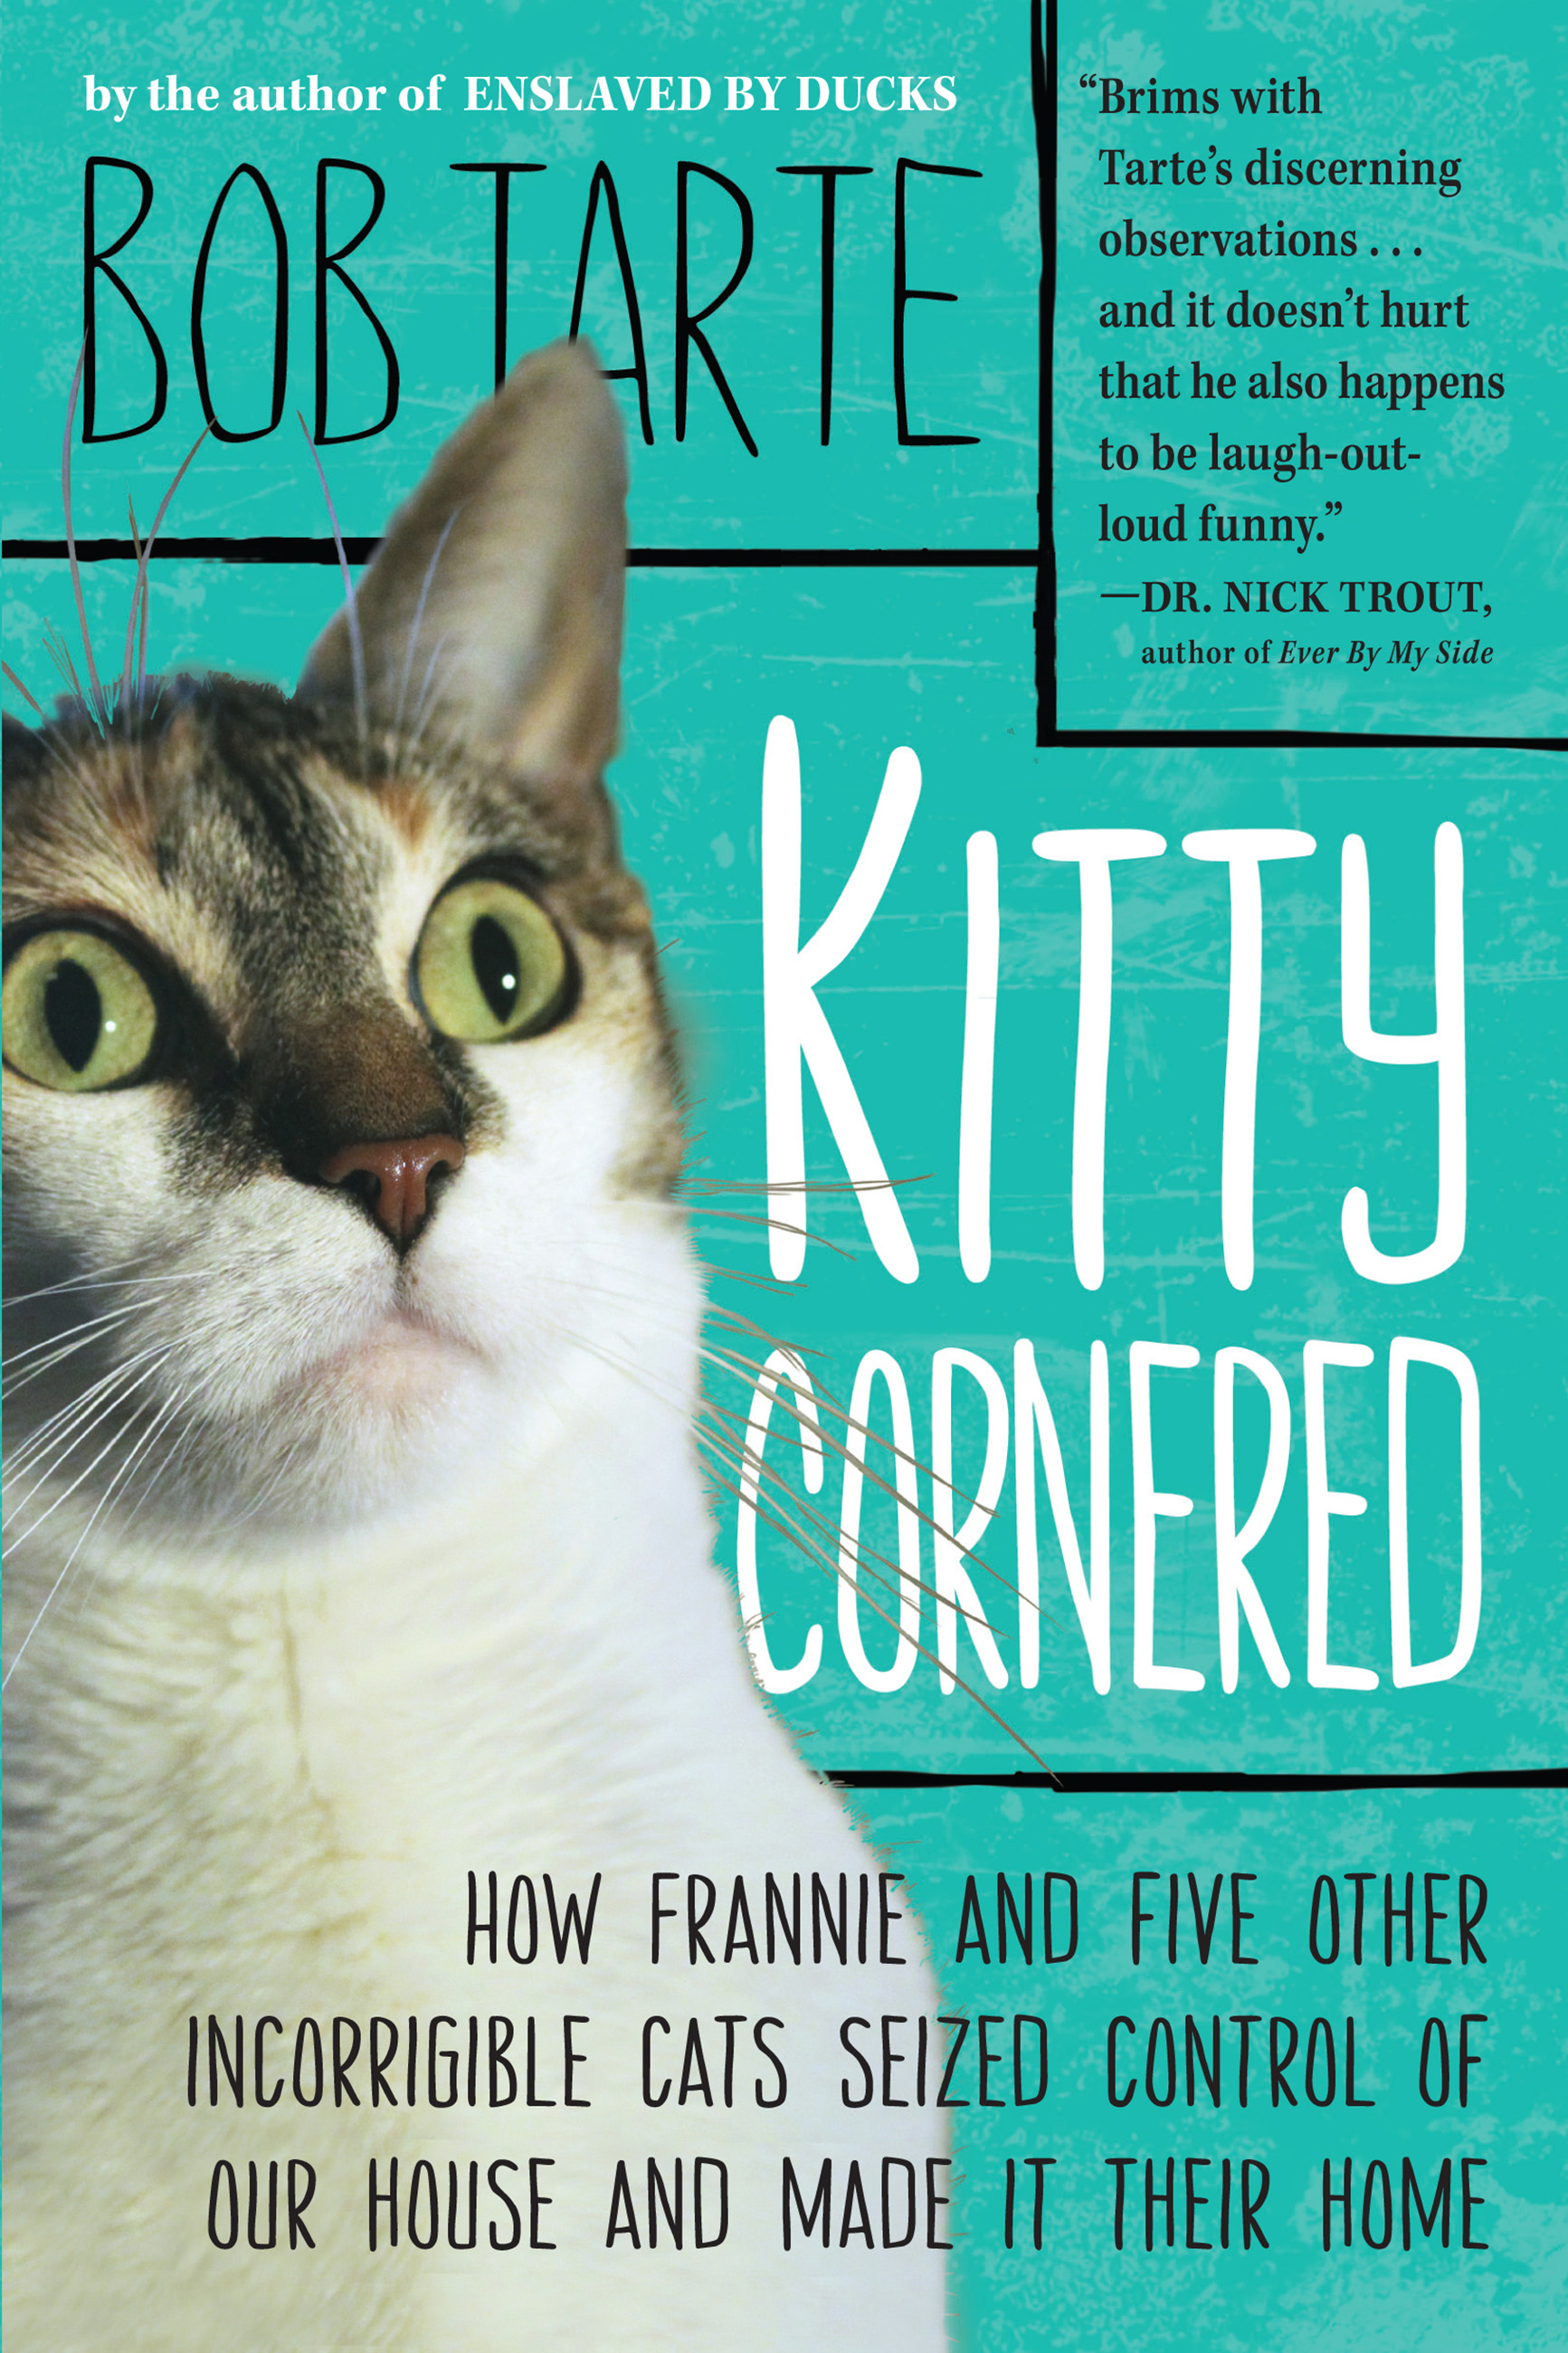 Kitty cornered how Frannie and five other incorrigable cats seized control of our house and made it their home cover image